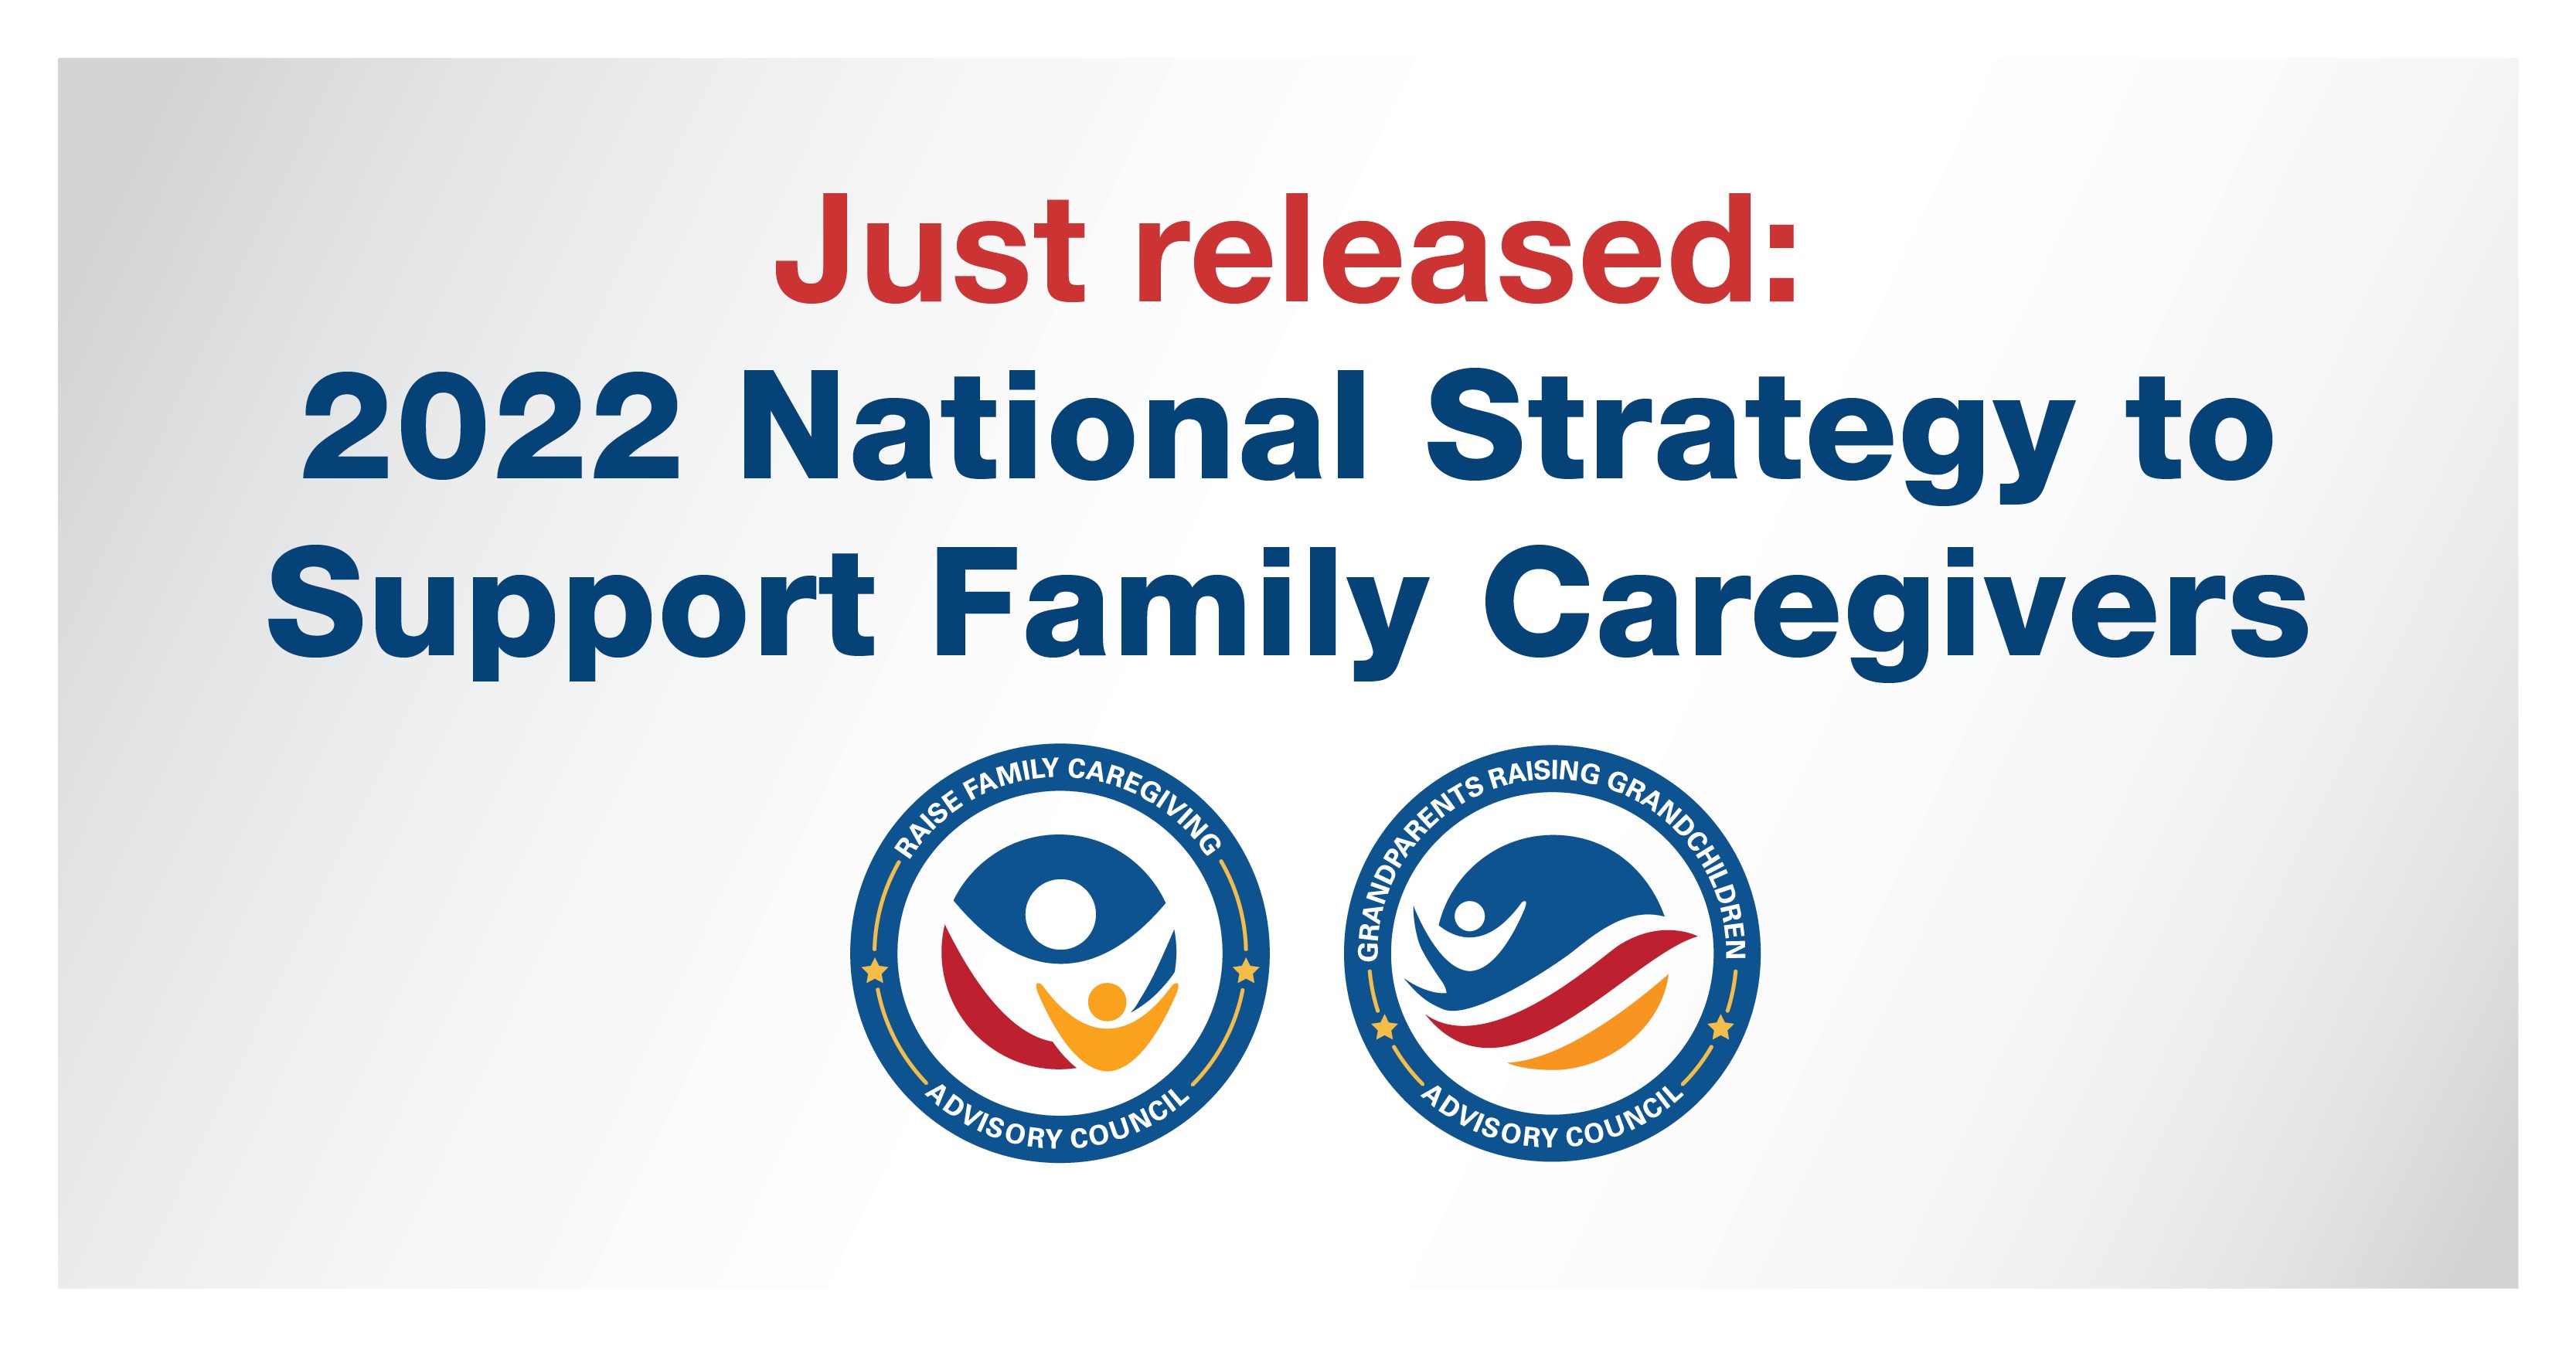 Just released: 2022 National Strategy to Support Family Caregivers